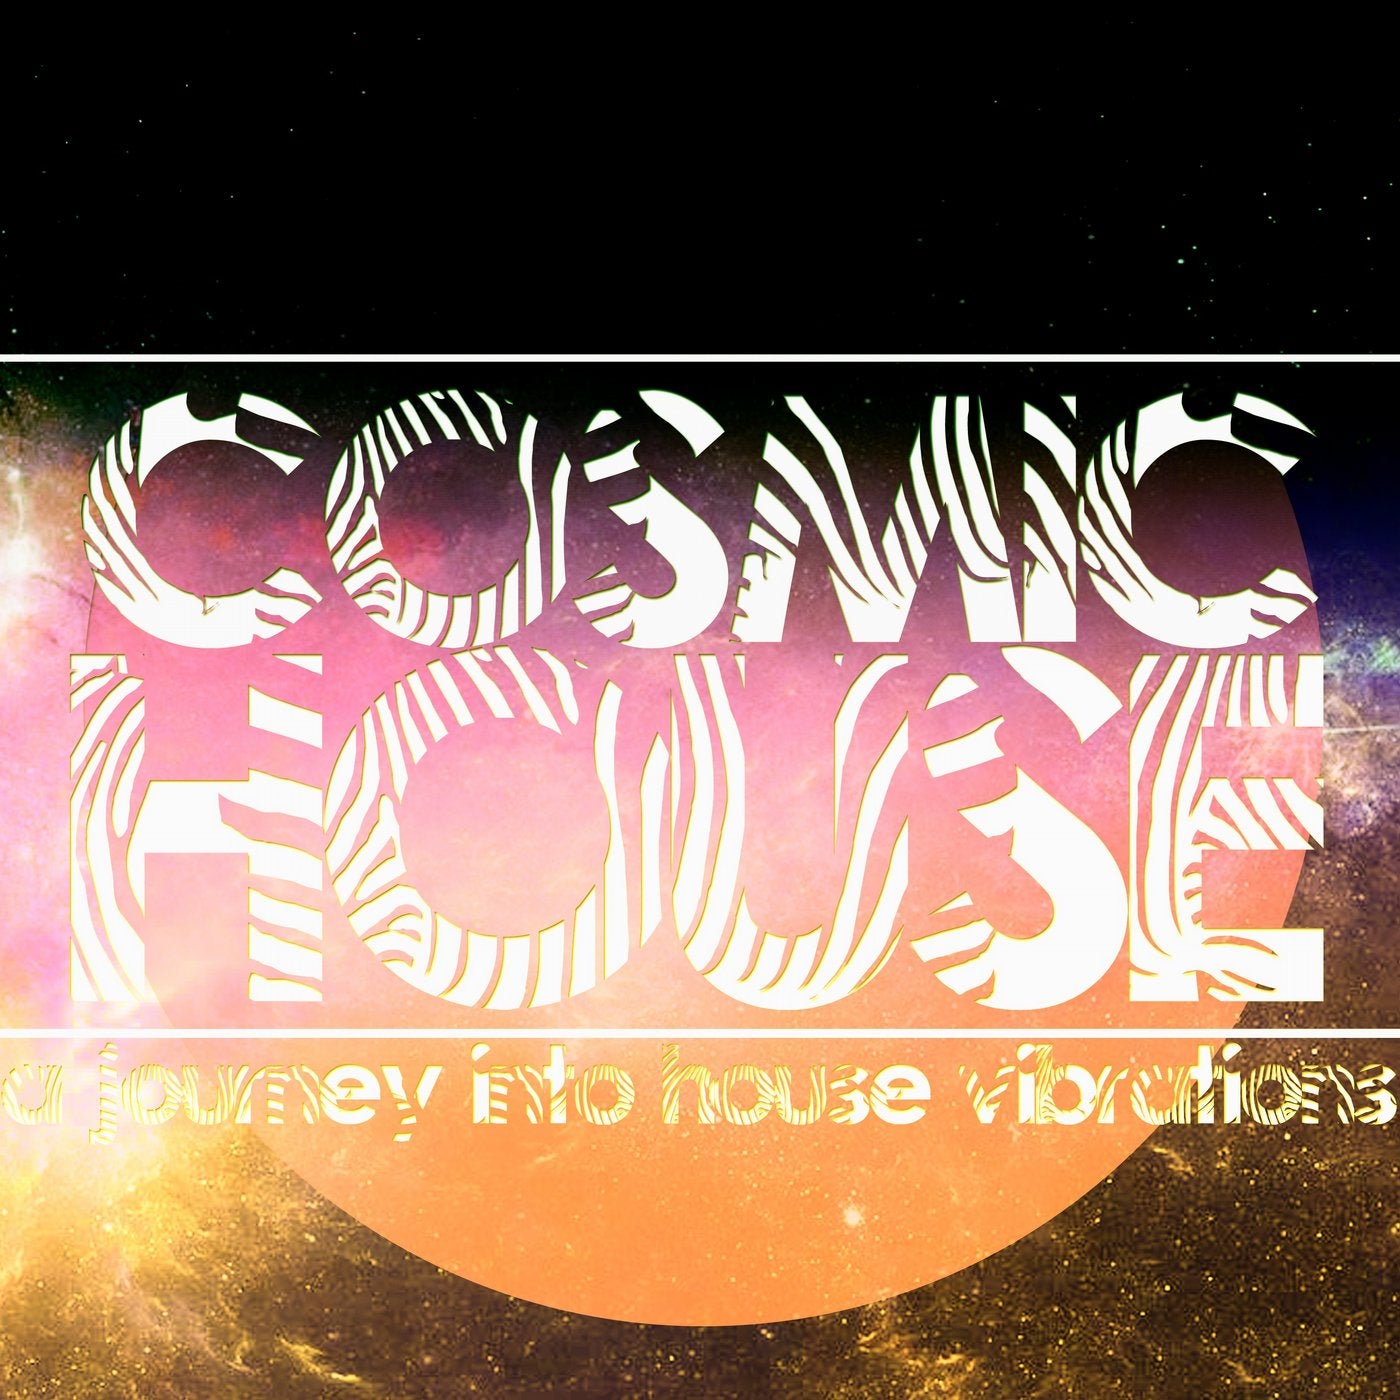 Cosmic House (A Journey into House Vibrations)